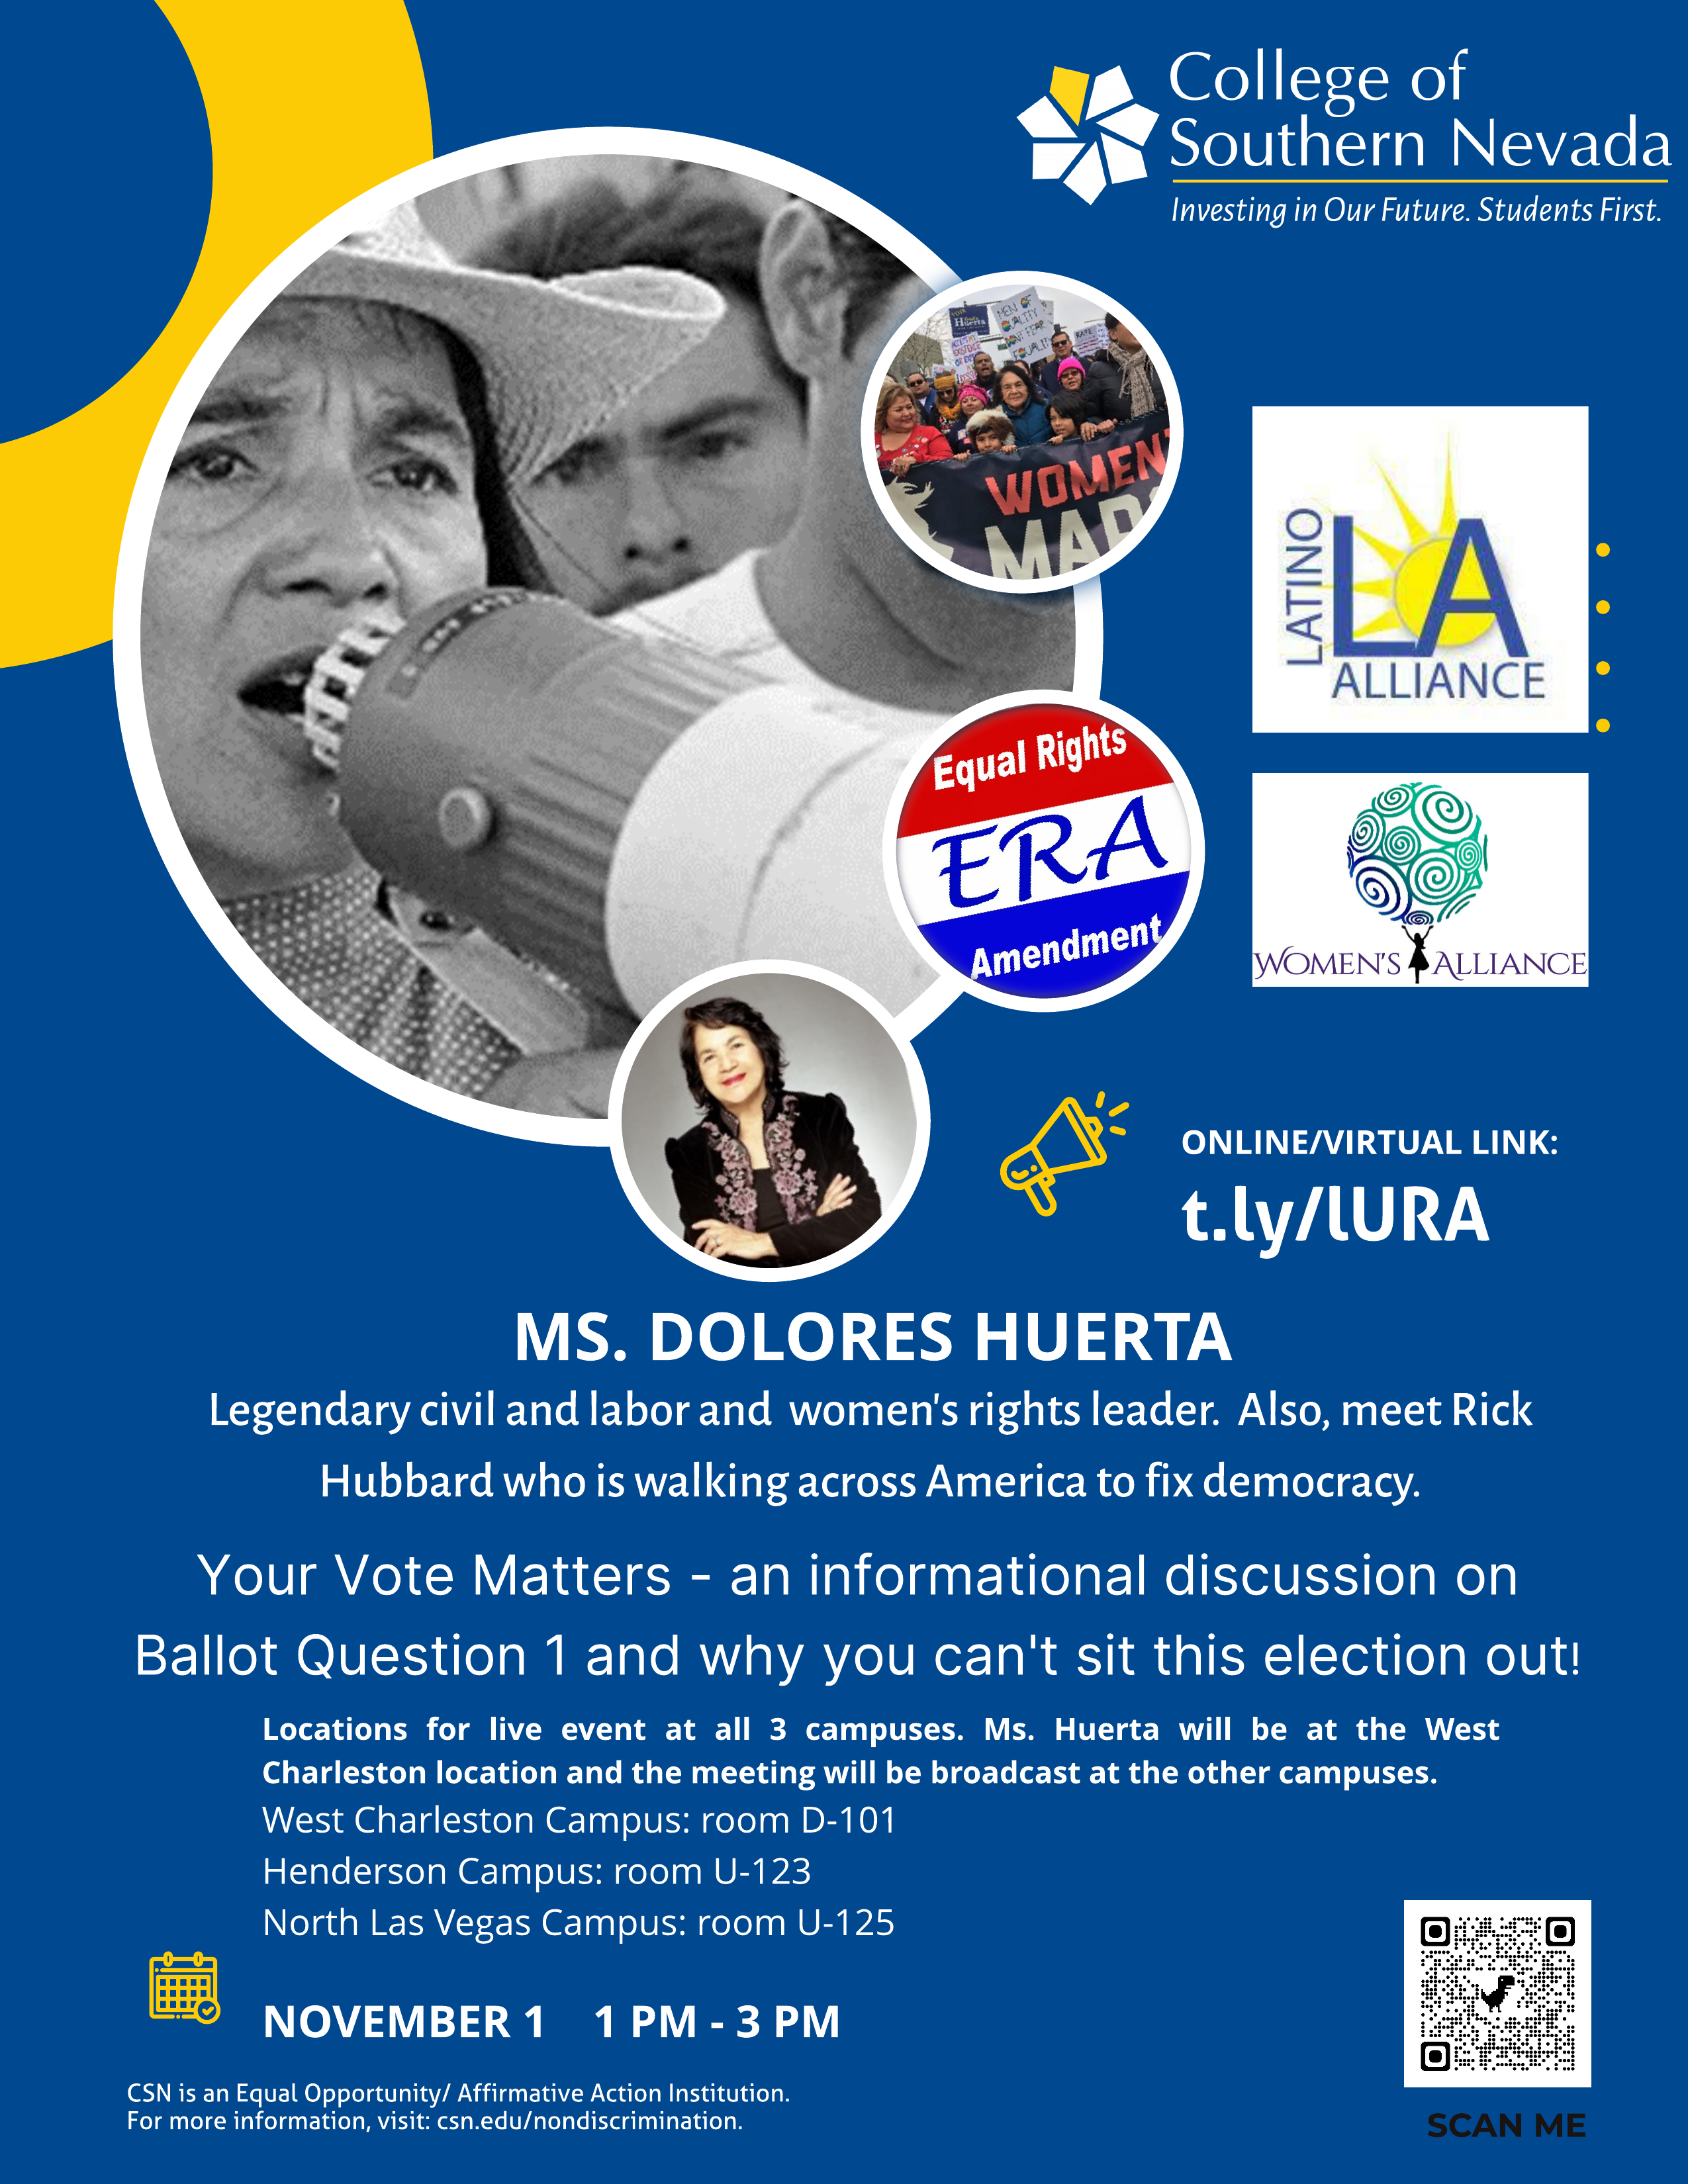 Your Vote Matters featuring Dolores Huerta